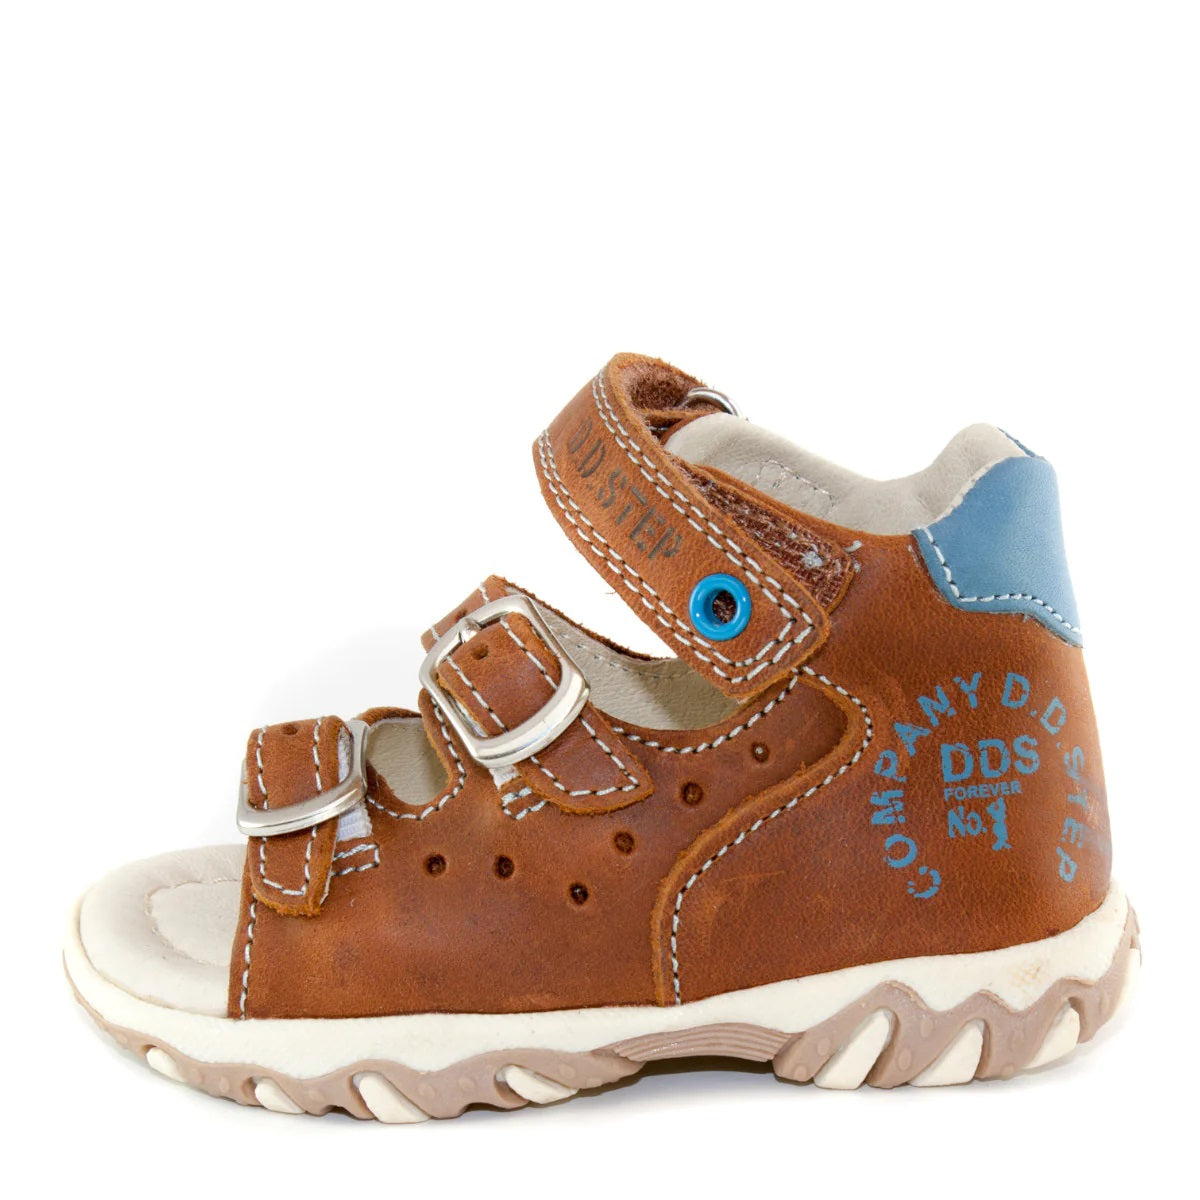 Premium quality first walker sandals with genuine leather lining and upper in brown color and buckles. Thanks to its high level of specialization, D.D. Step knows exactly what your child’s feet need, to develop properly in the various phases of growth. The exceptional comfort these shoes provide assure the well-being and happiness of your child.